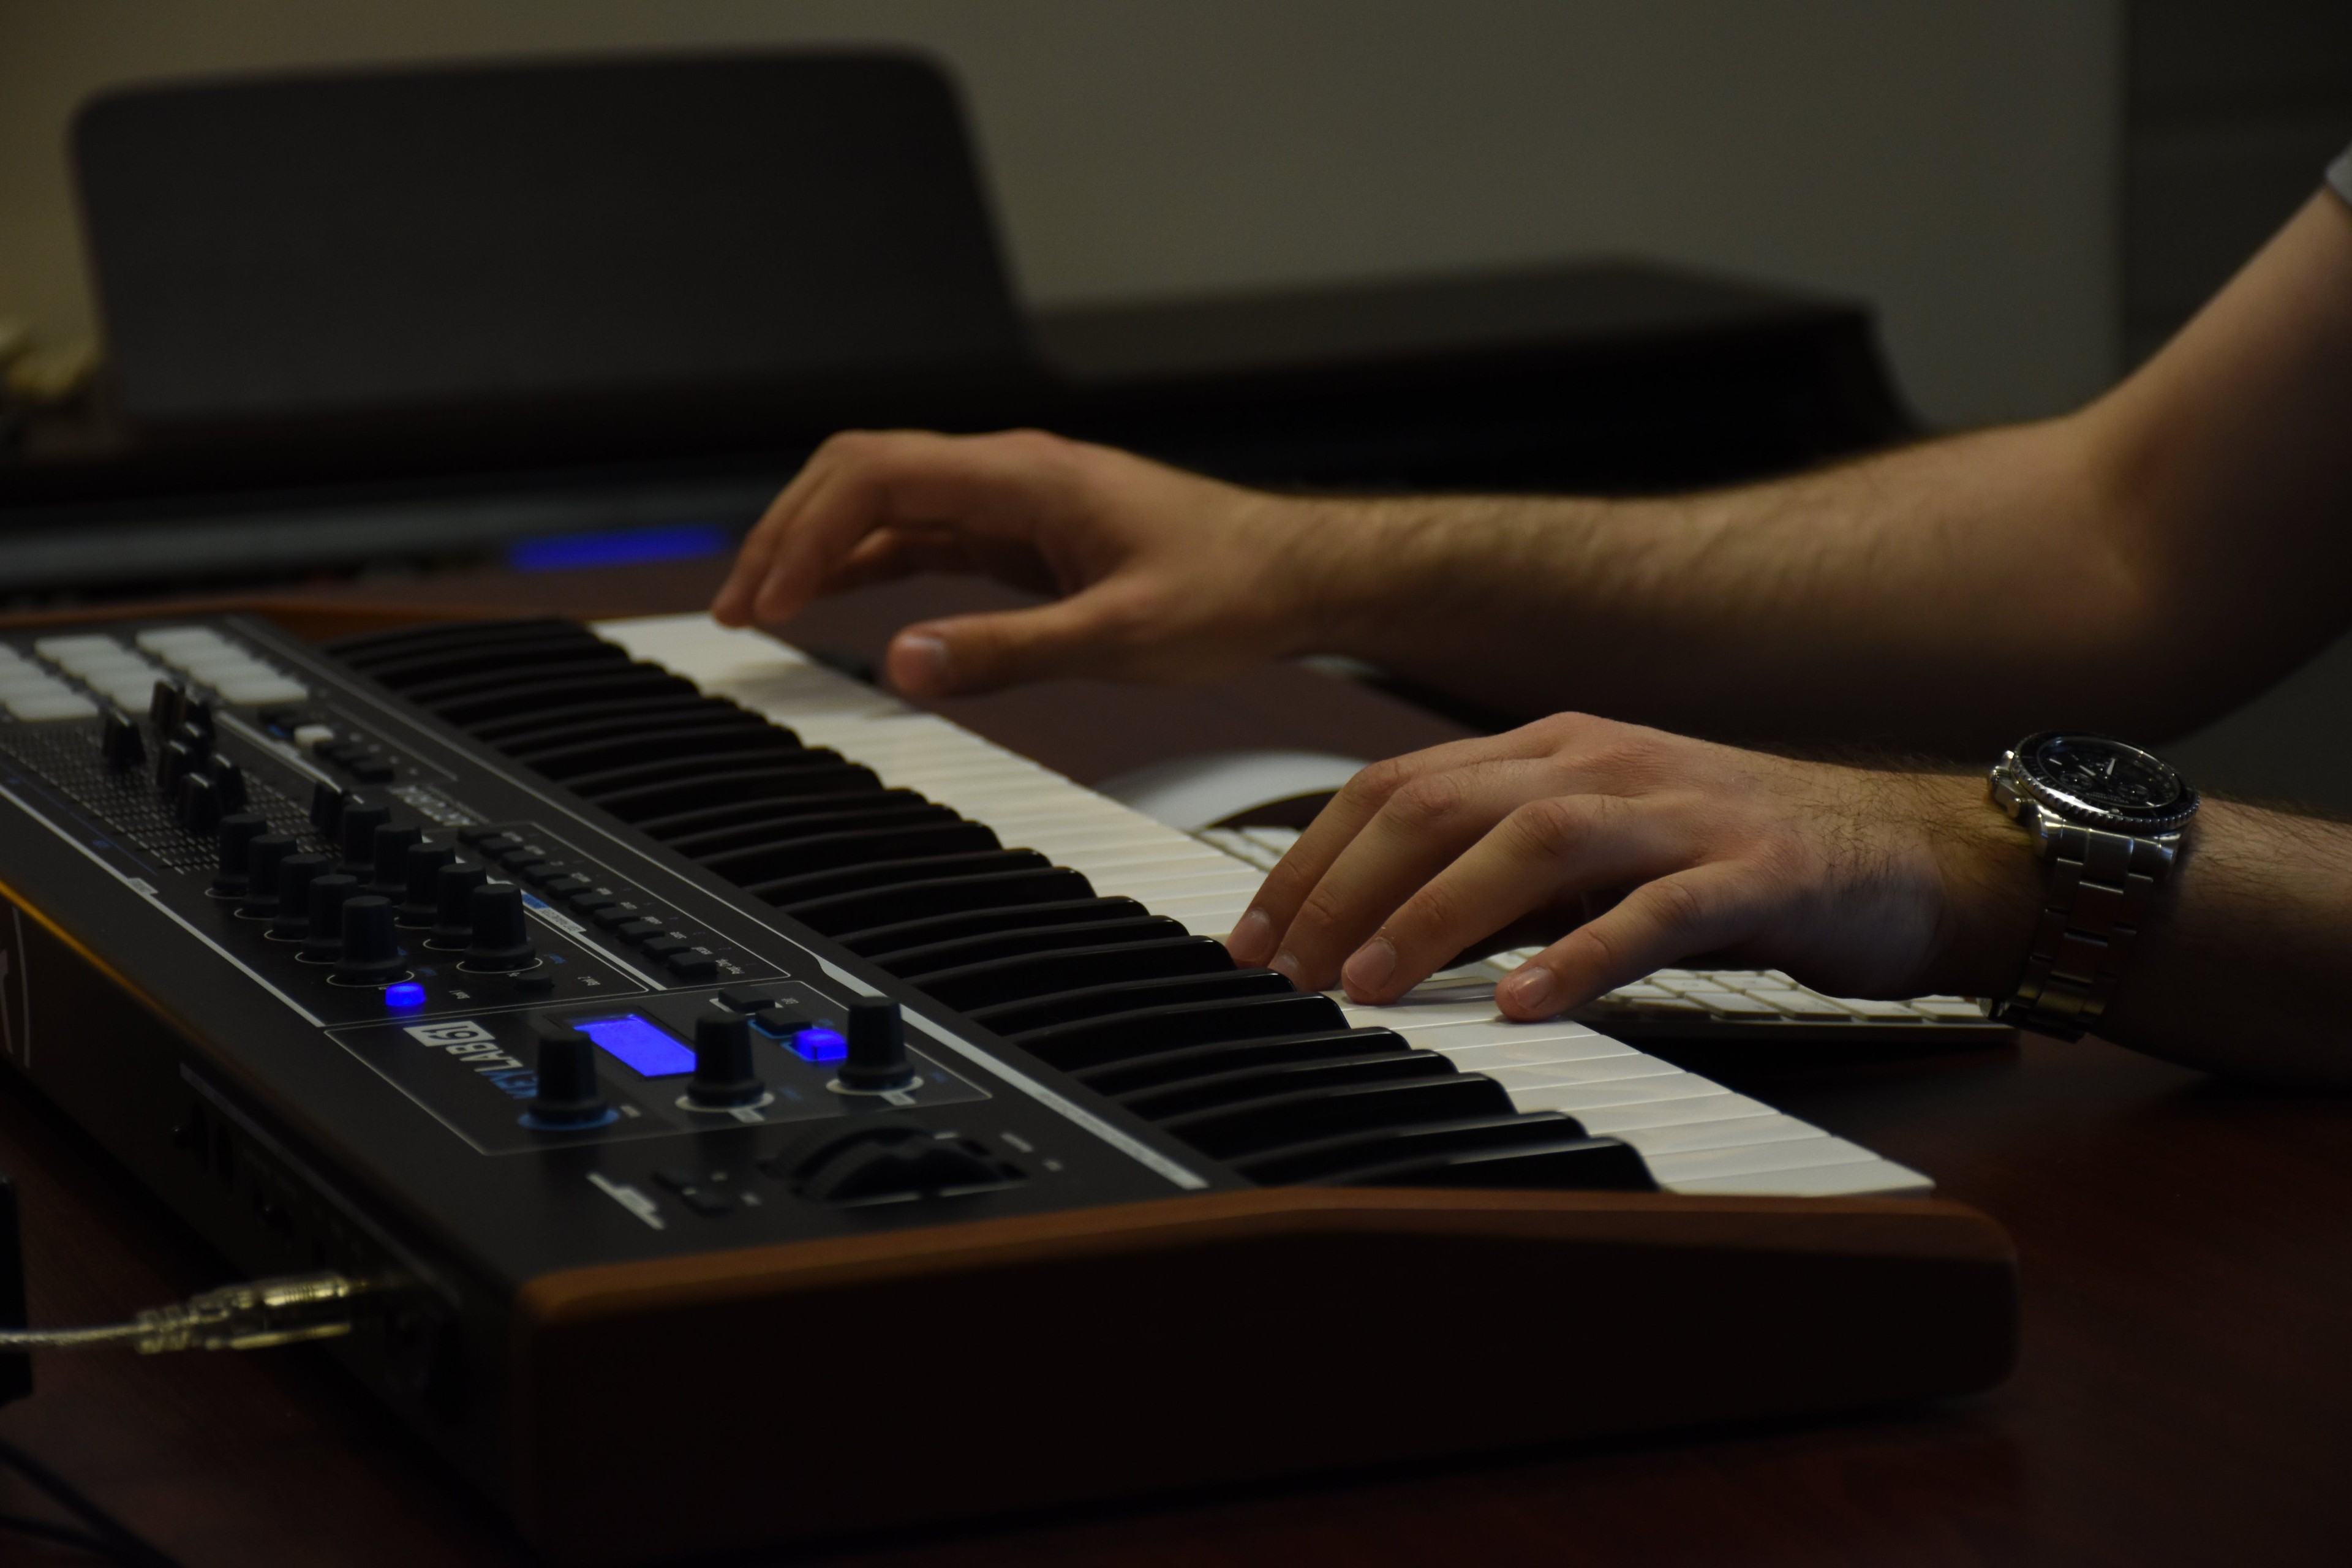 Midi Keyboards and controller